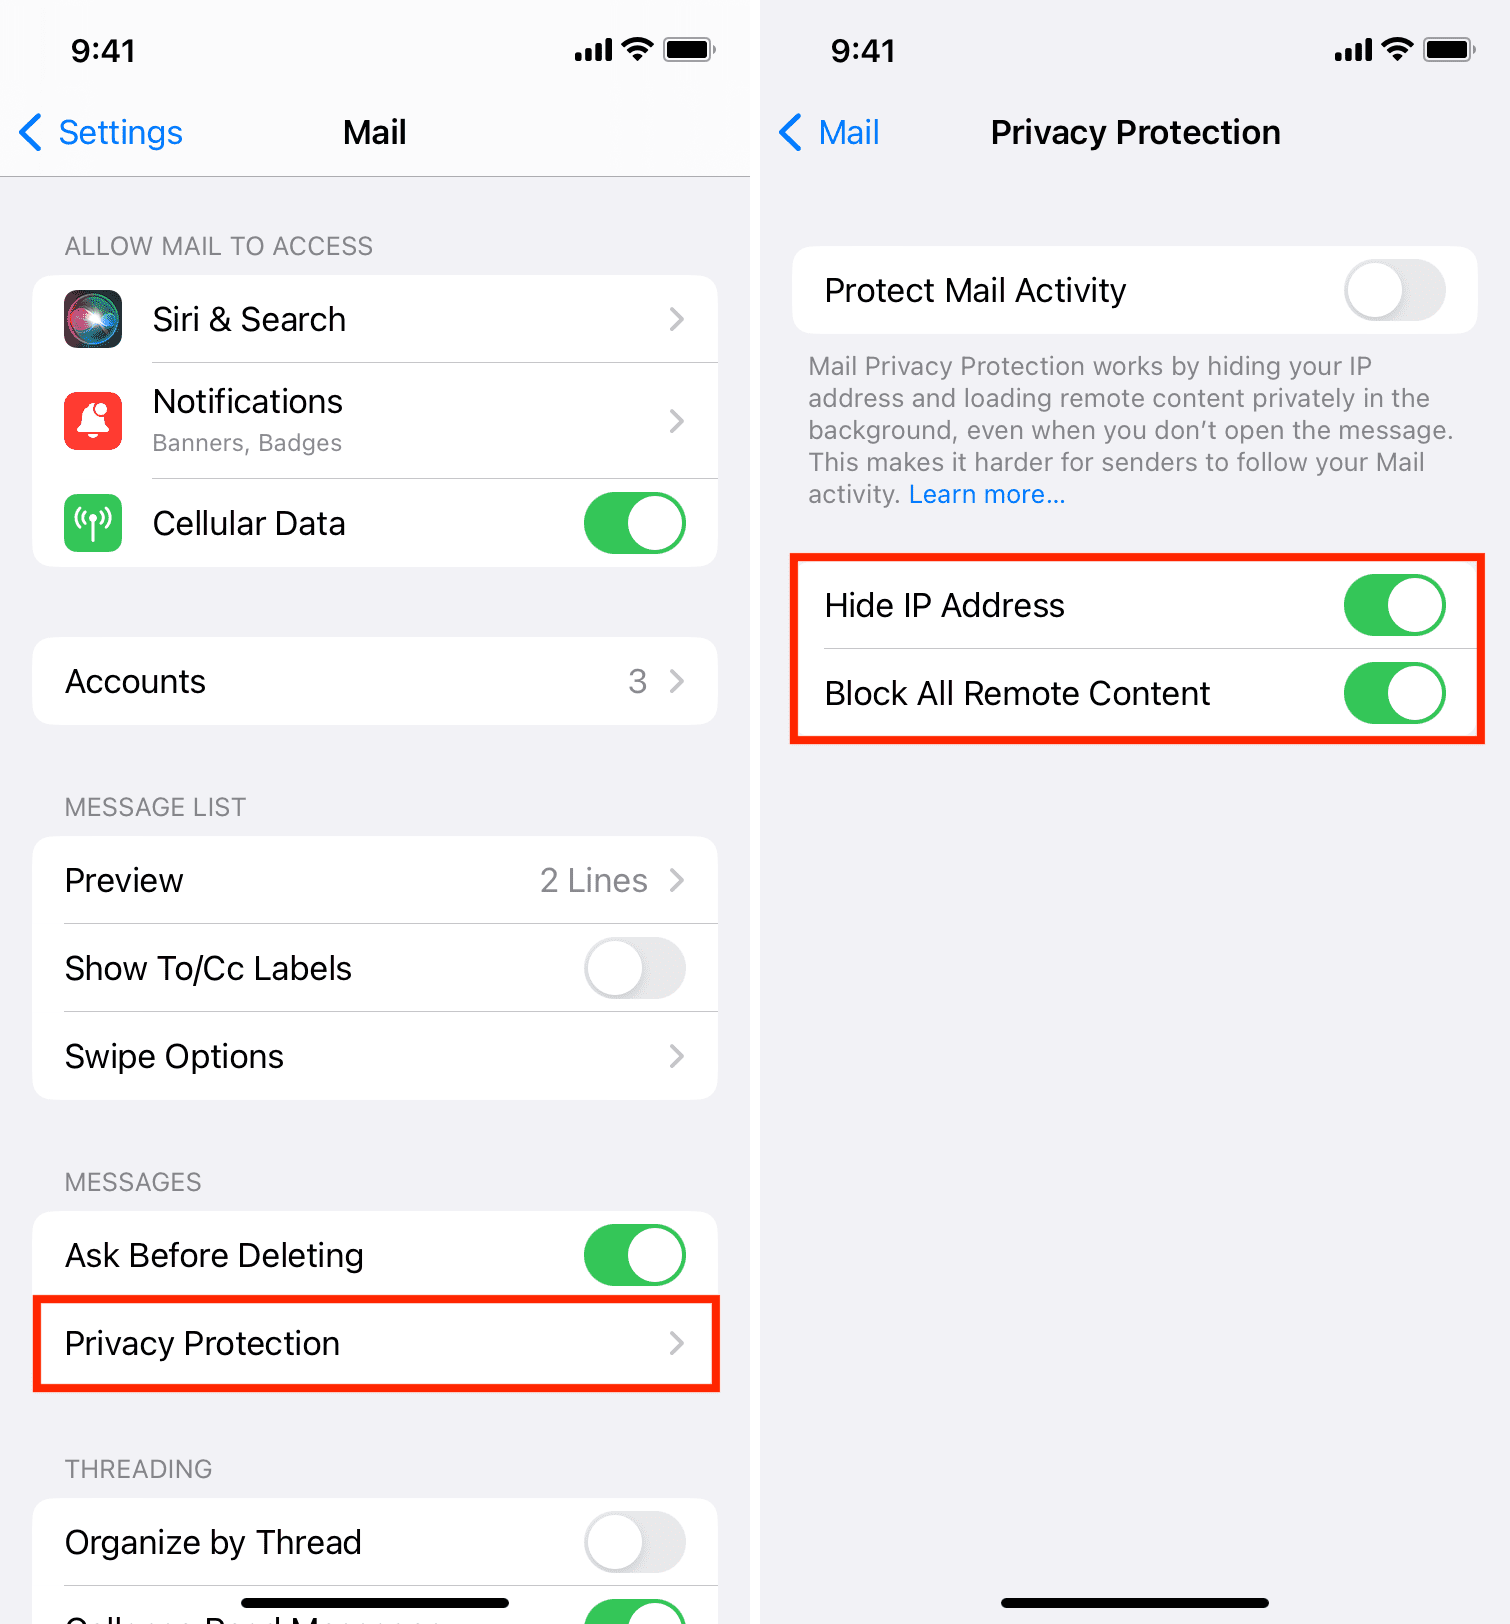 Block All Remote Content in Mail settings on iOS to prevent email tracking